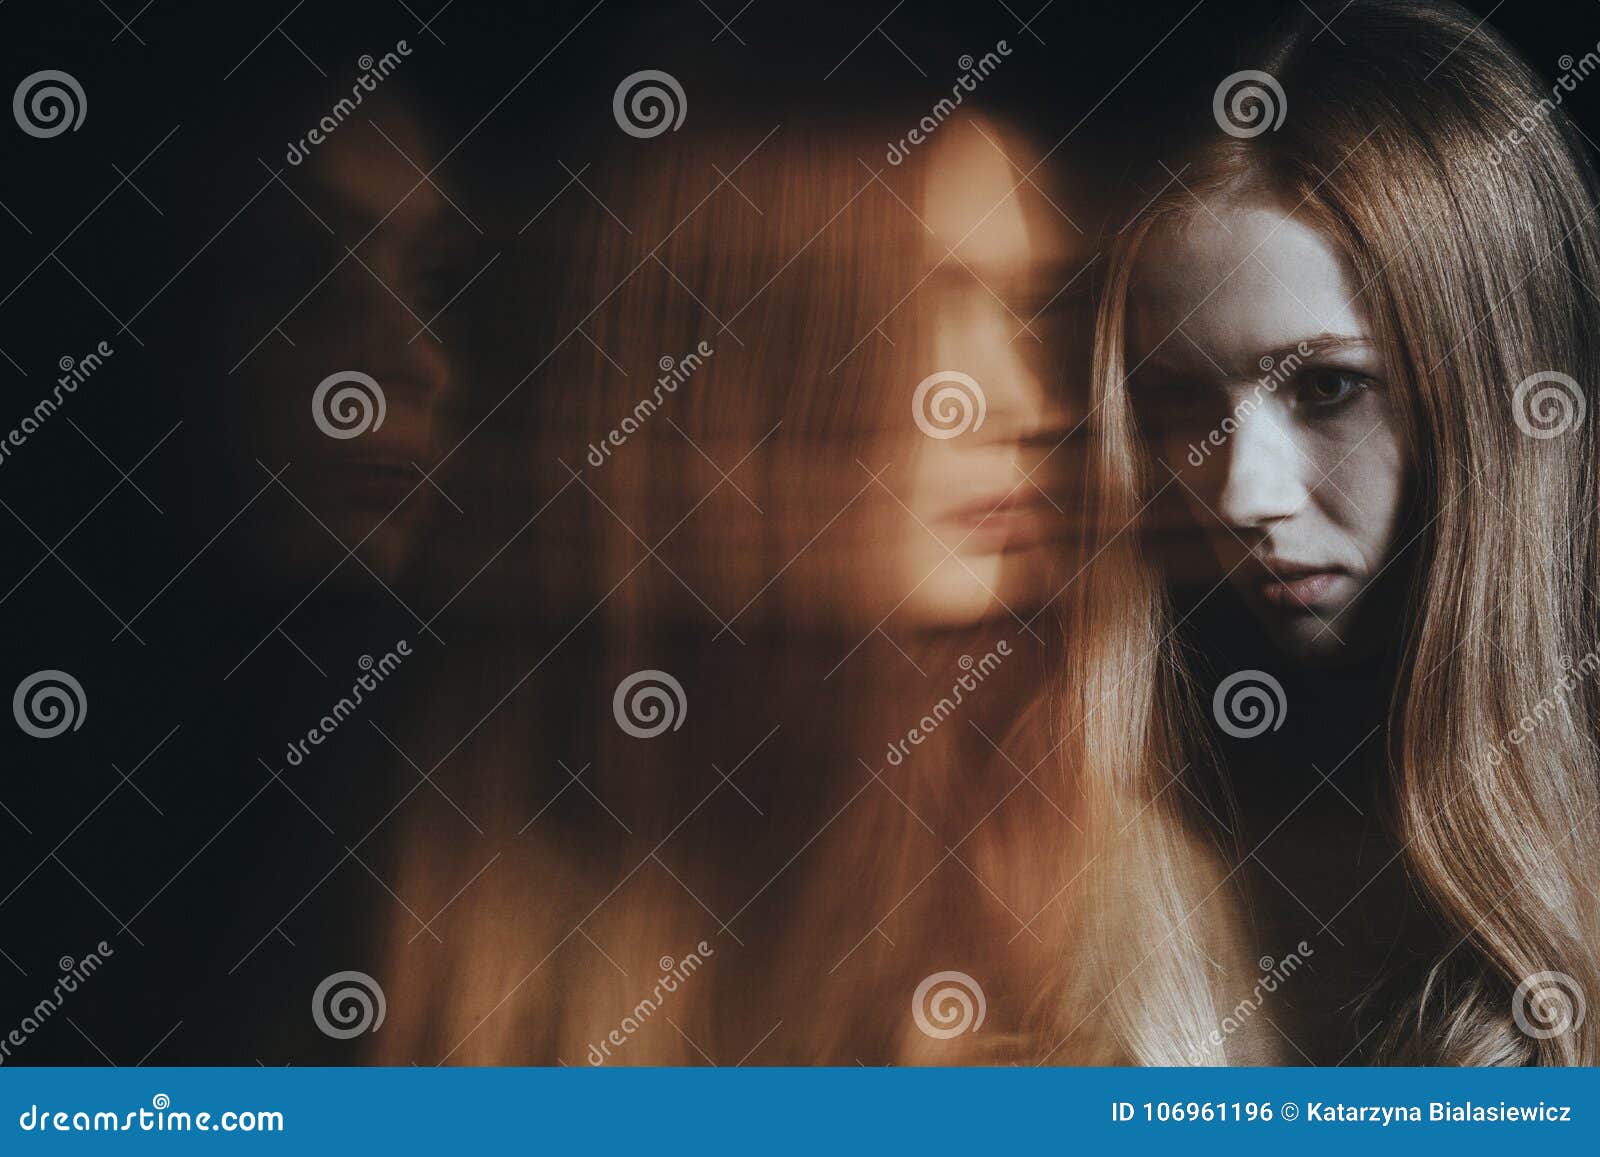 young girl with psychiatric problem